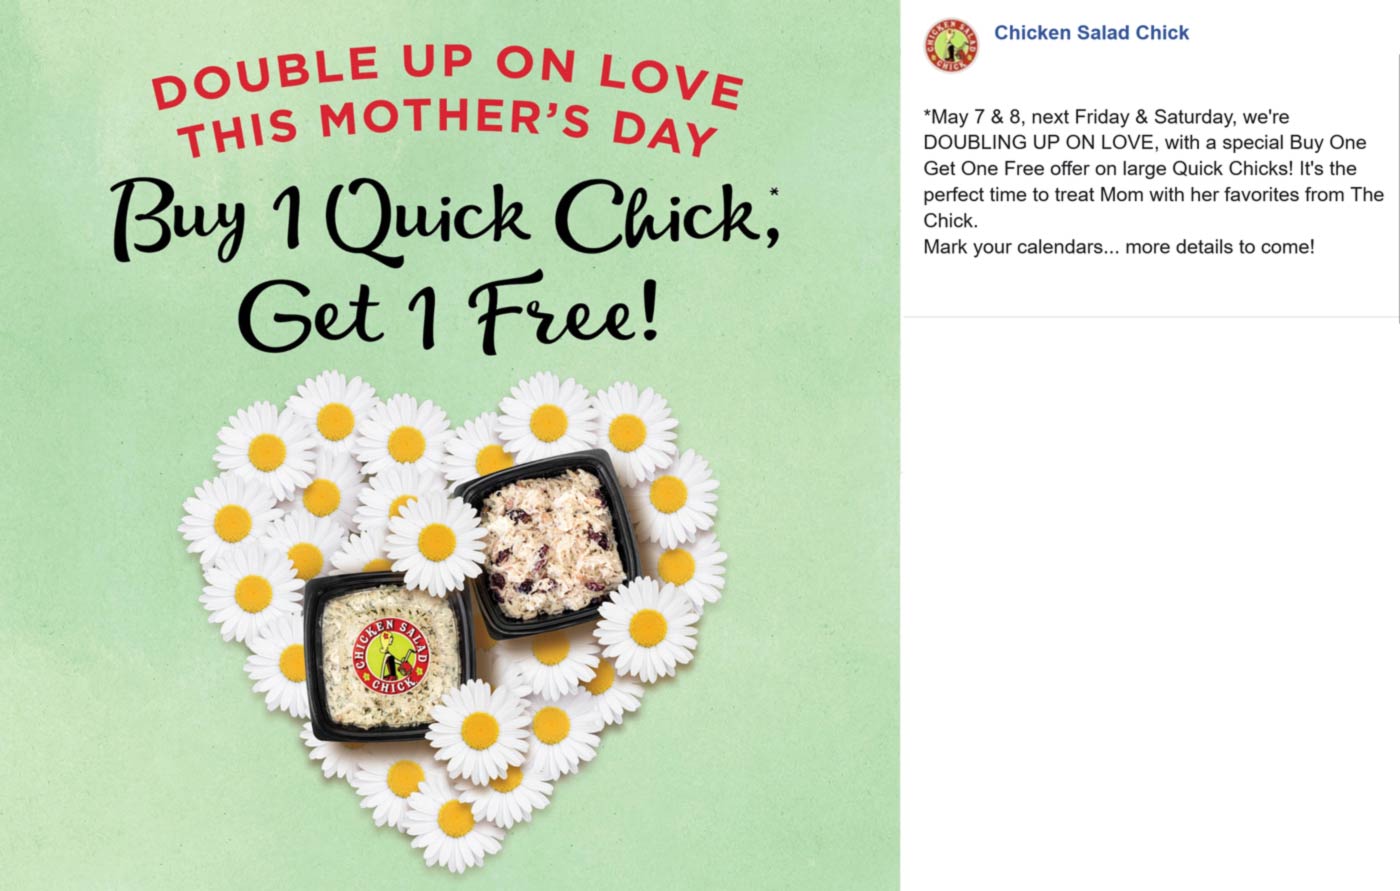 Second quick chick entree free today at Chicken Salad Chick restaurants